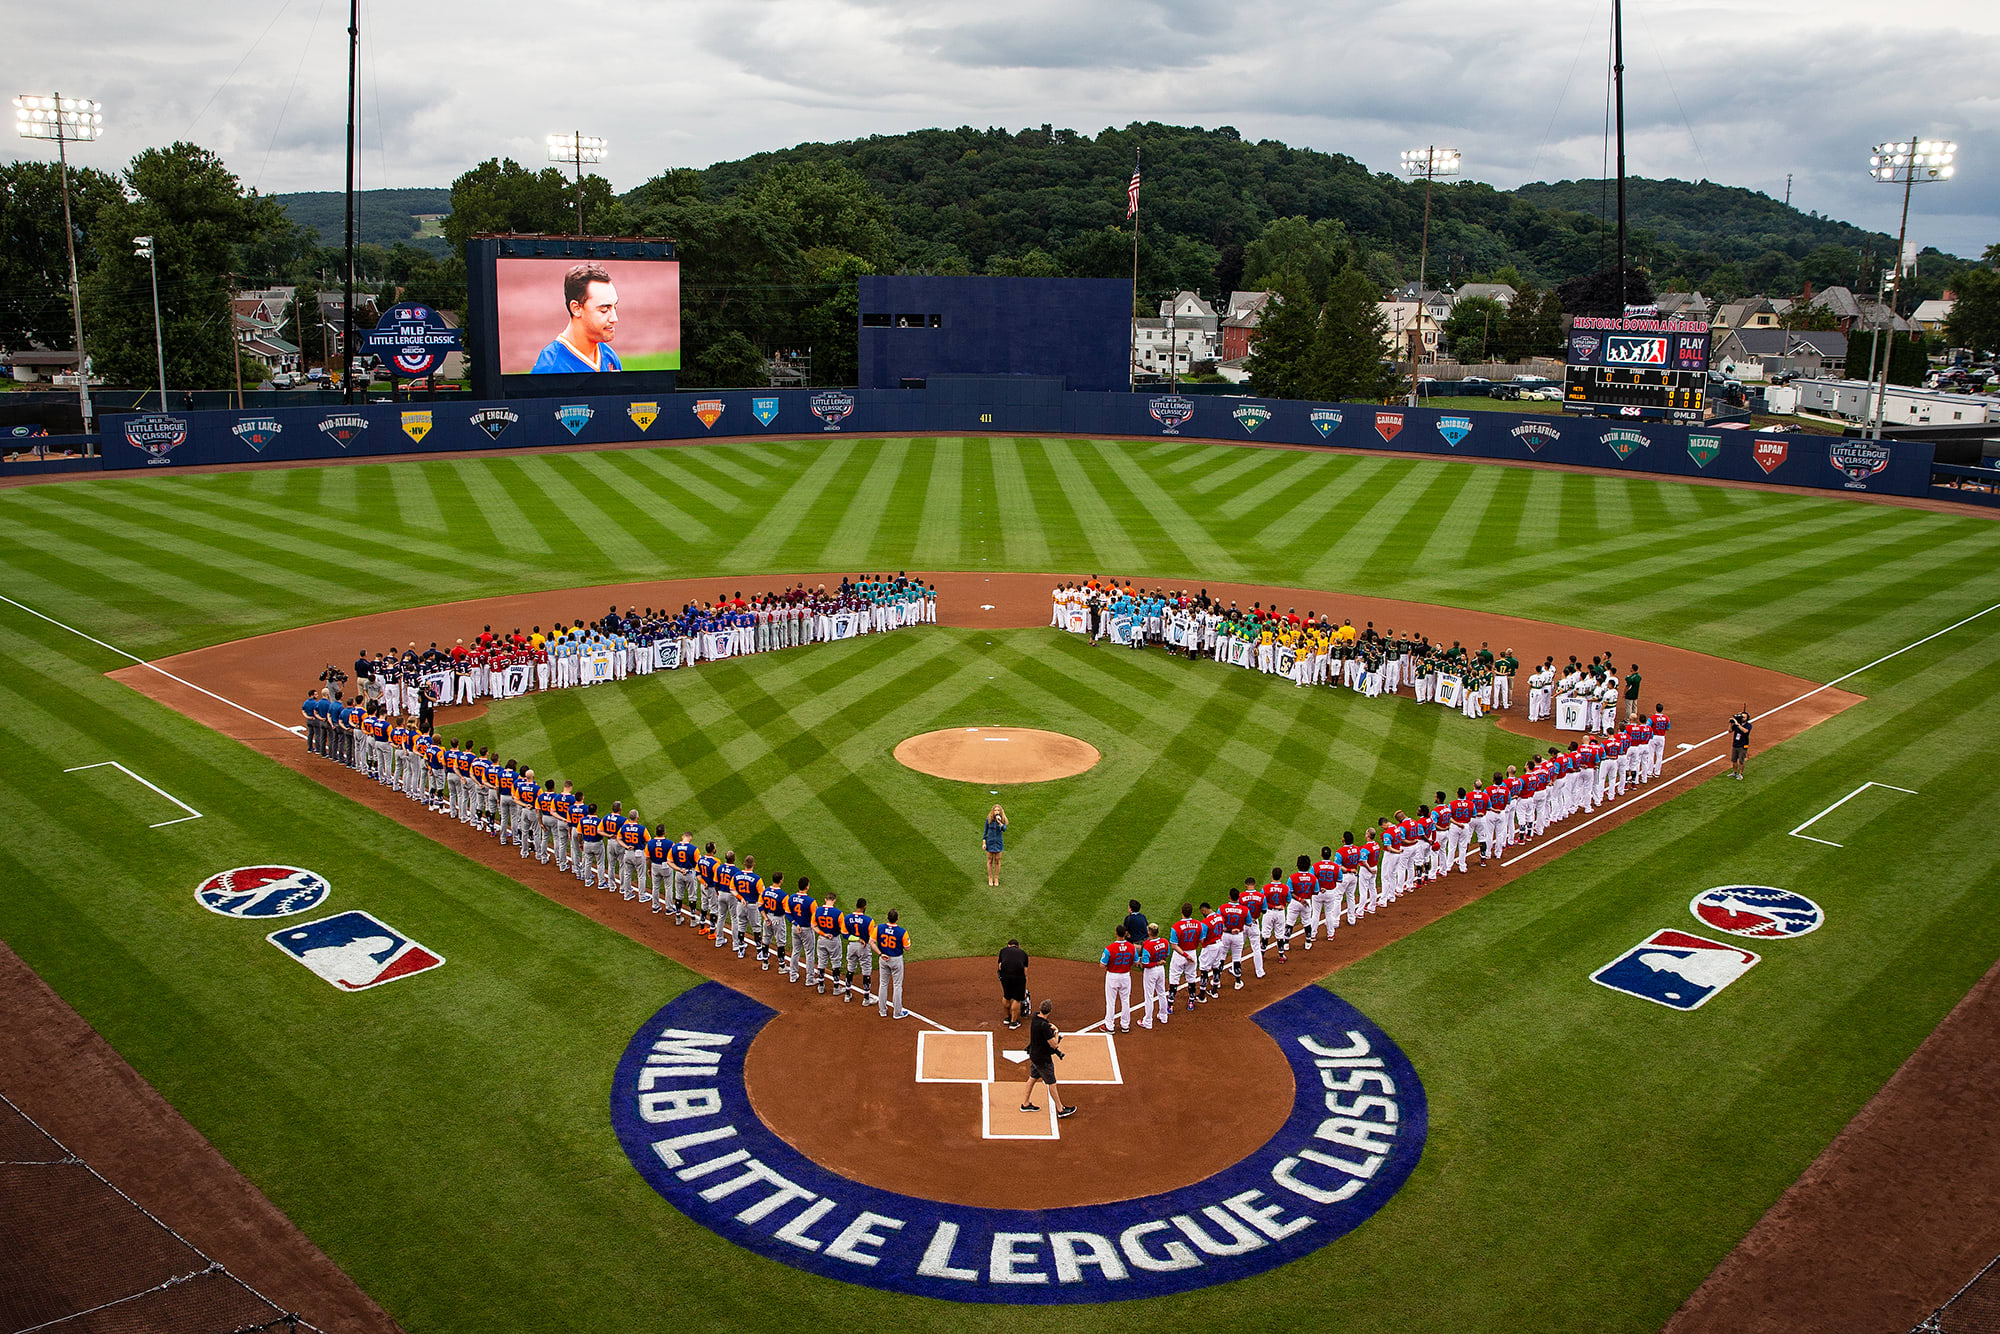 How to Watch the MLB Little League Classic - Angels vs. Indians (8